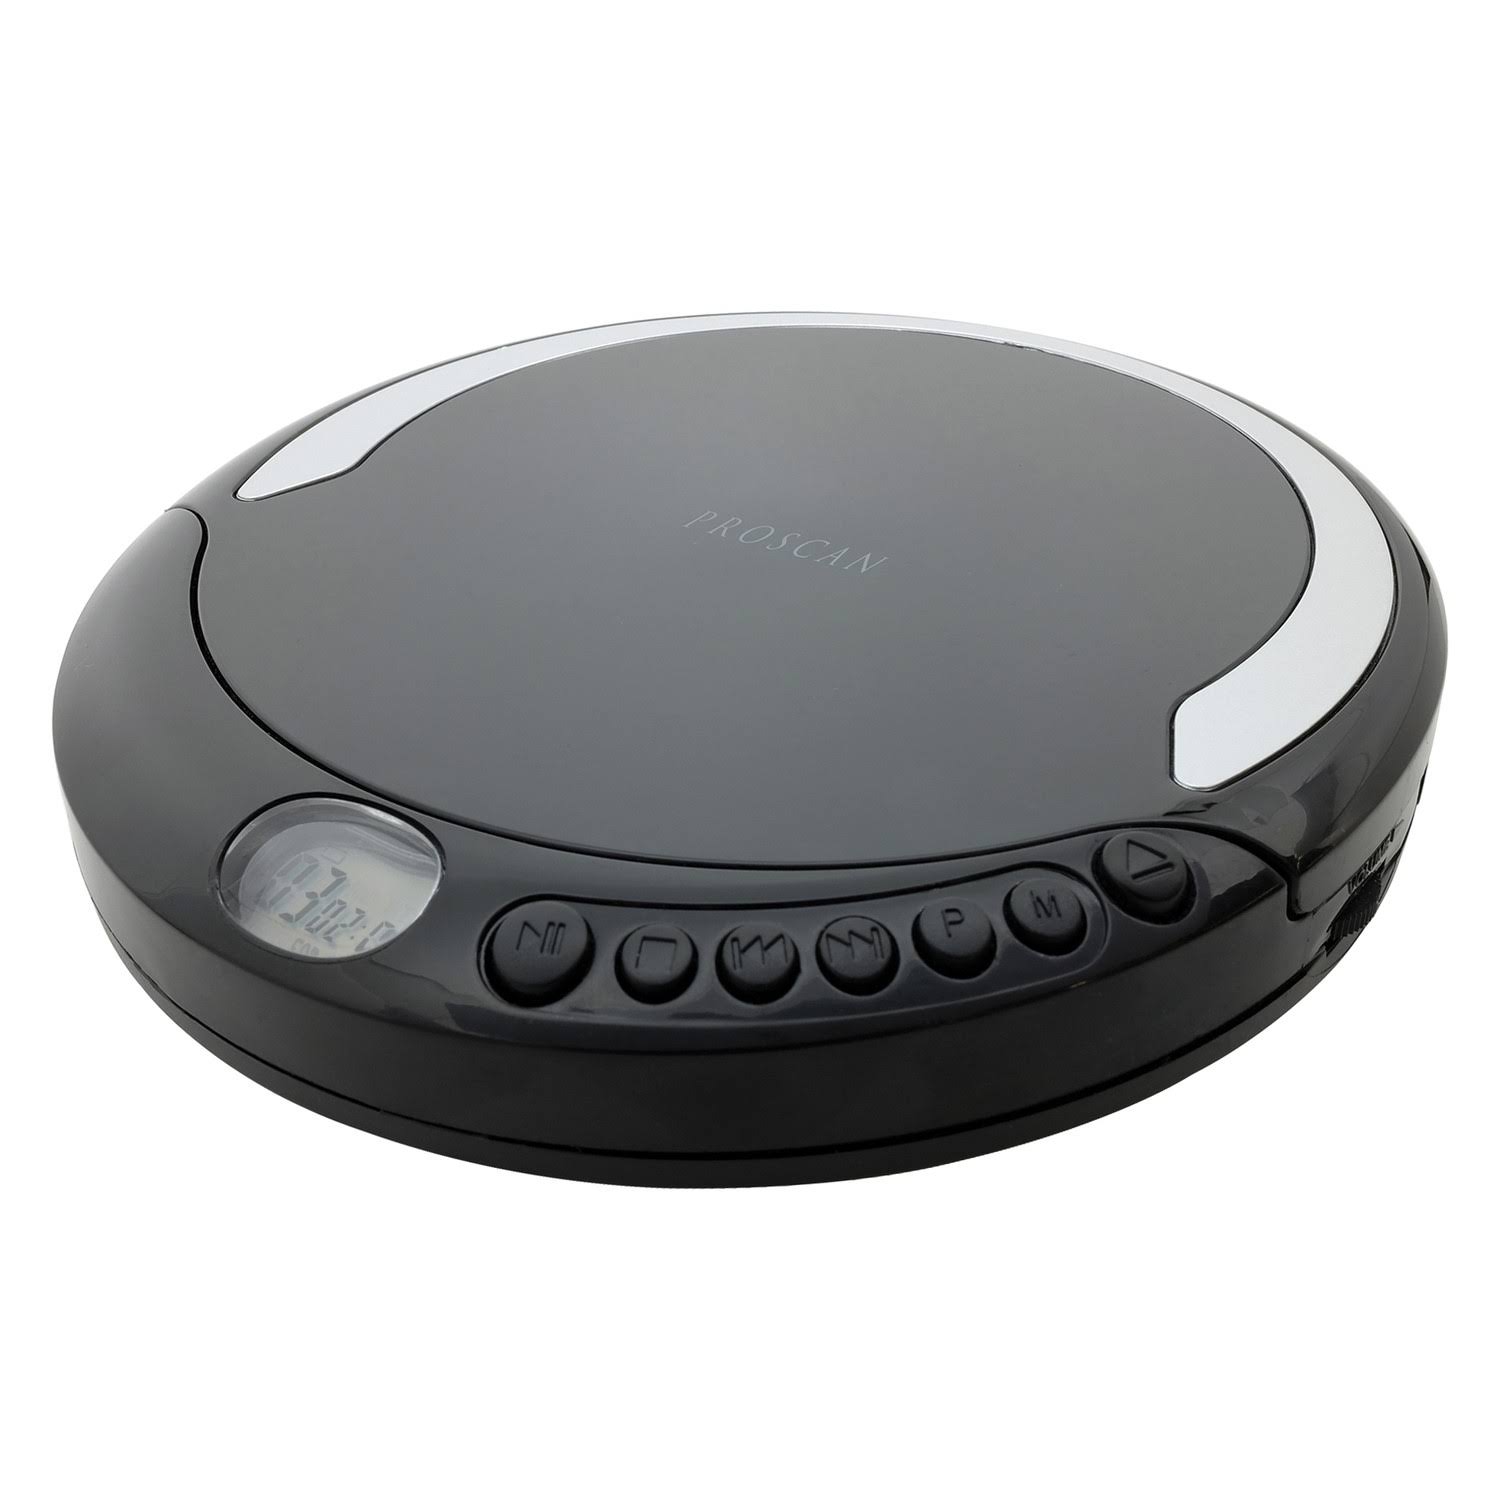 Proscan Pcd300 Personal CD Player with Earbuds